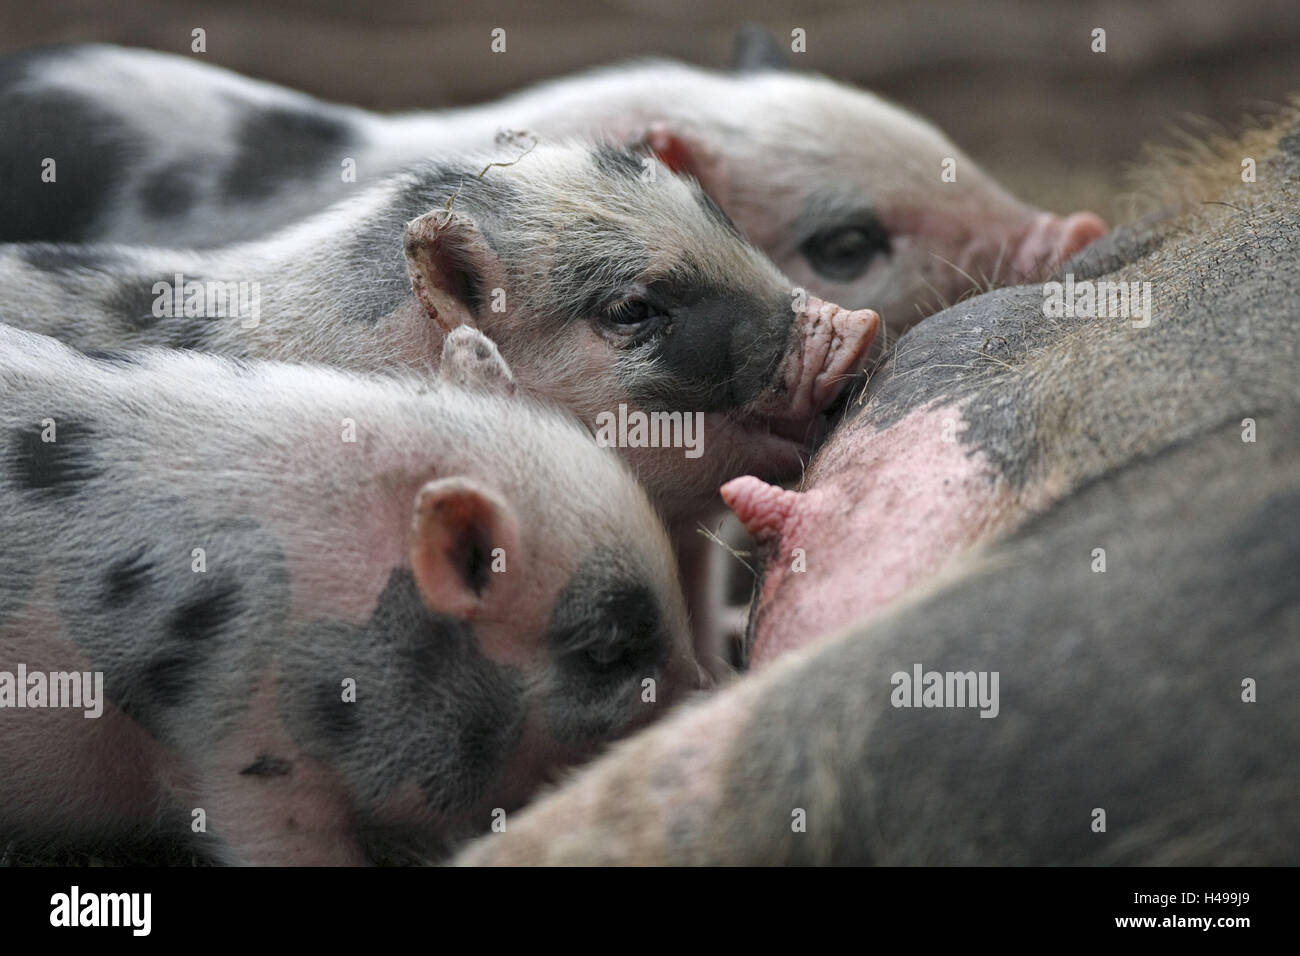 pot-bellied pig, piglets, suckle, Stock Photo